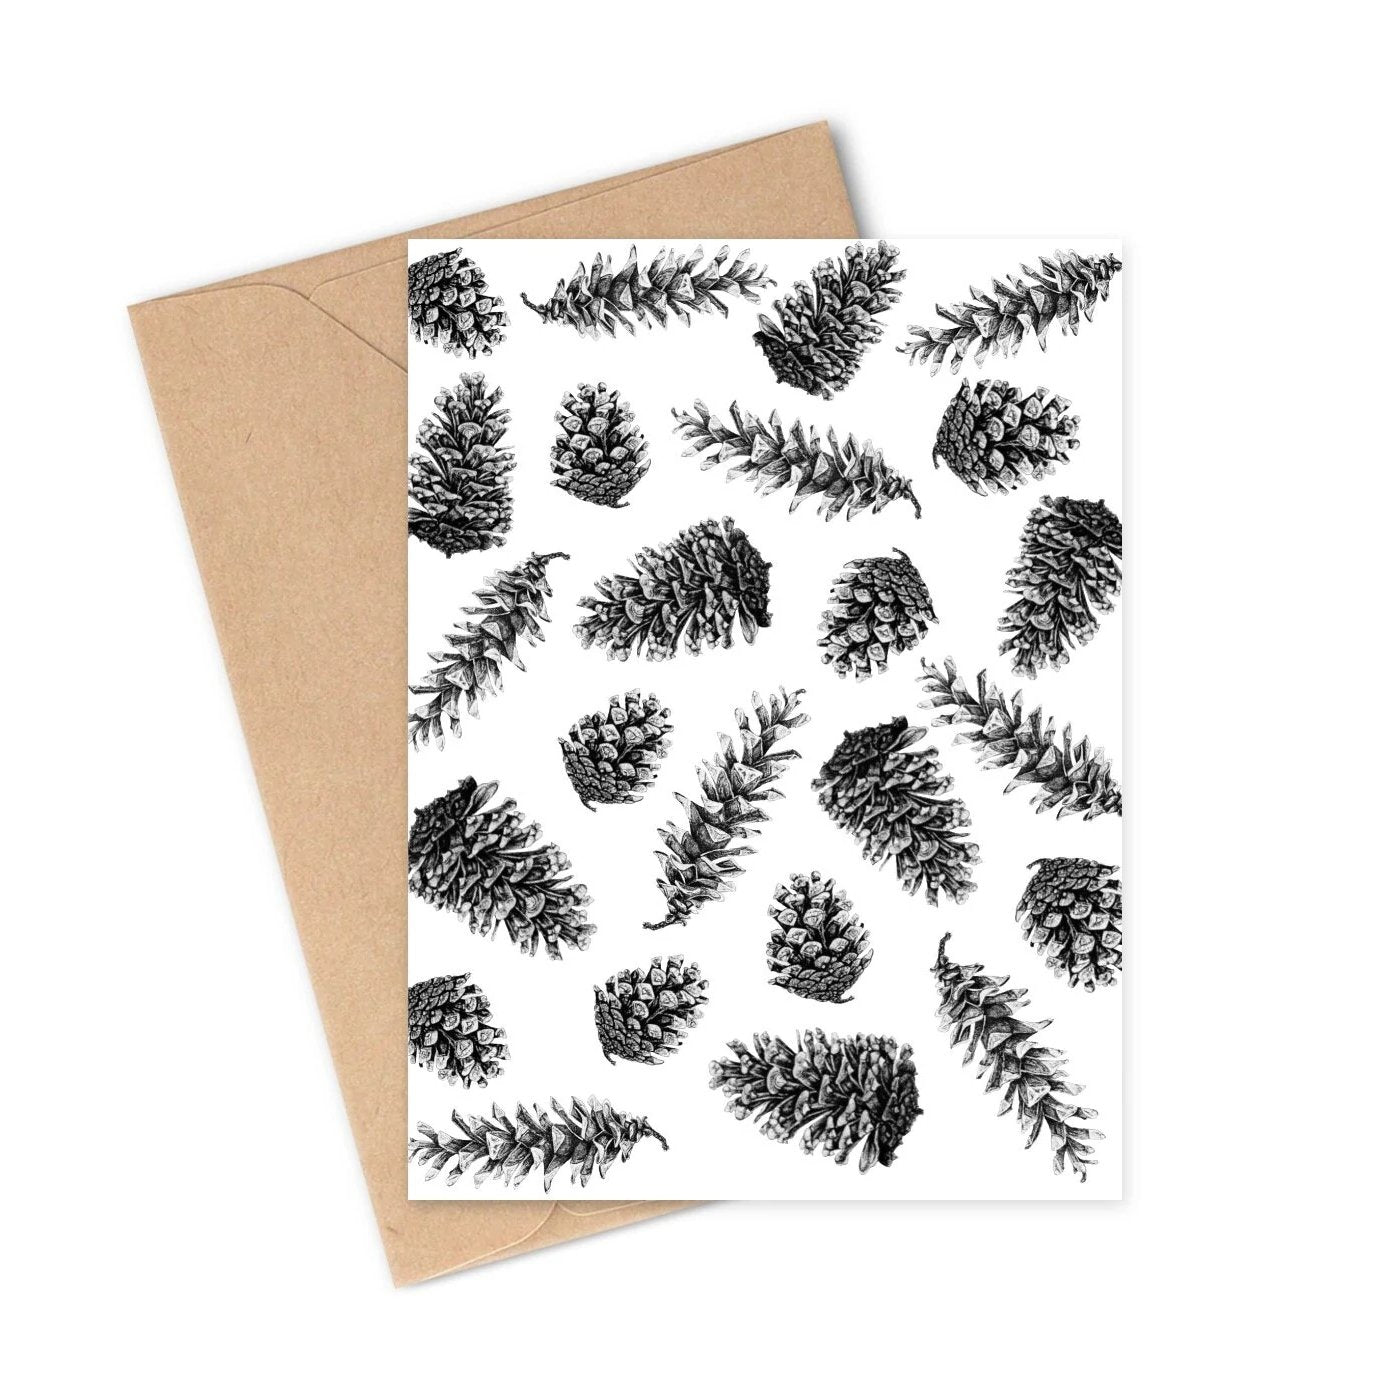 Pinecone Collage Card